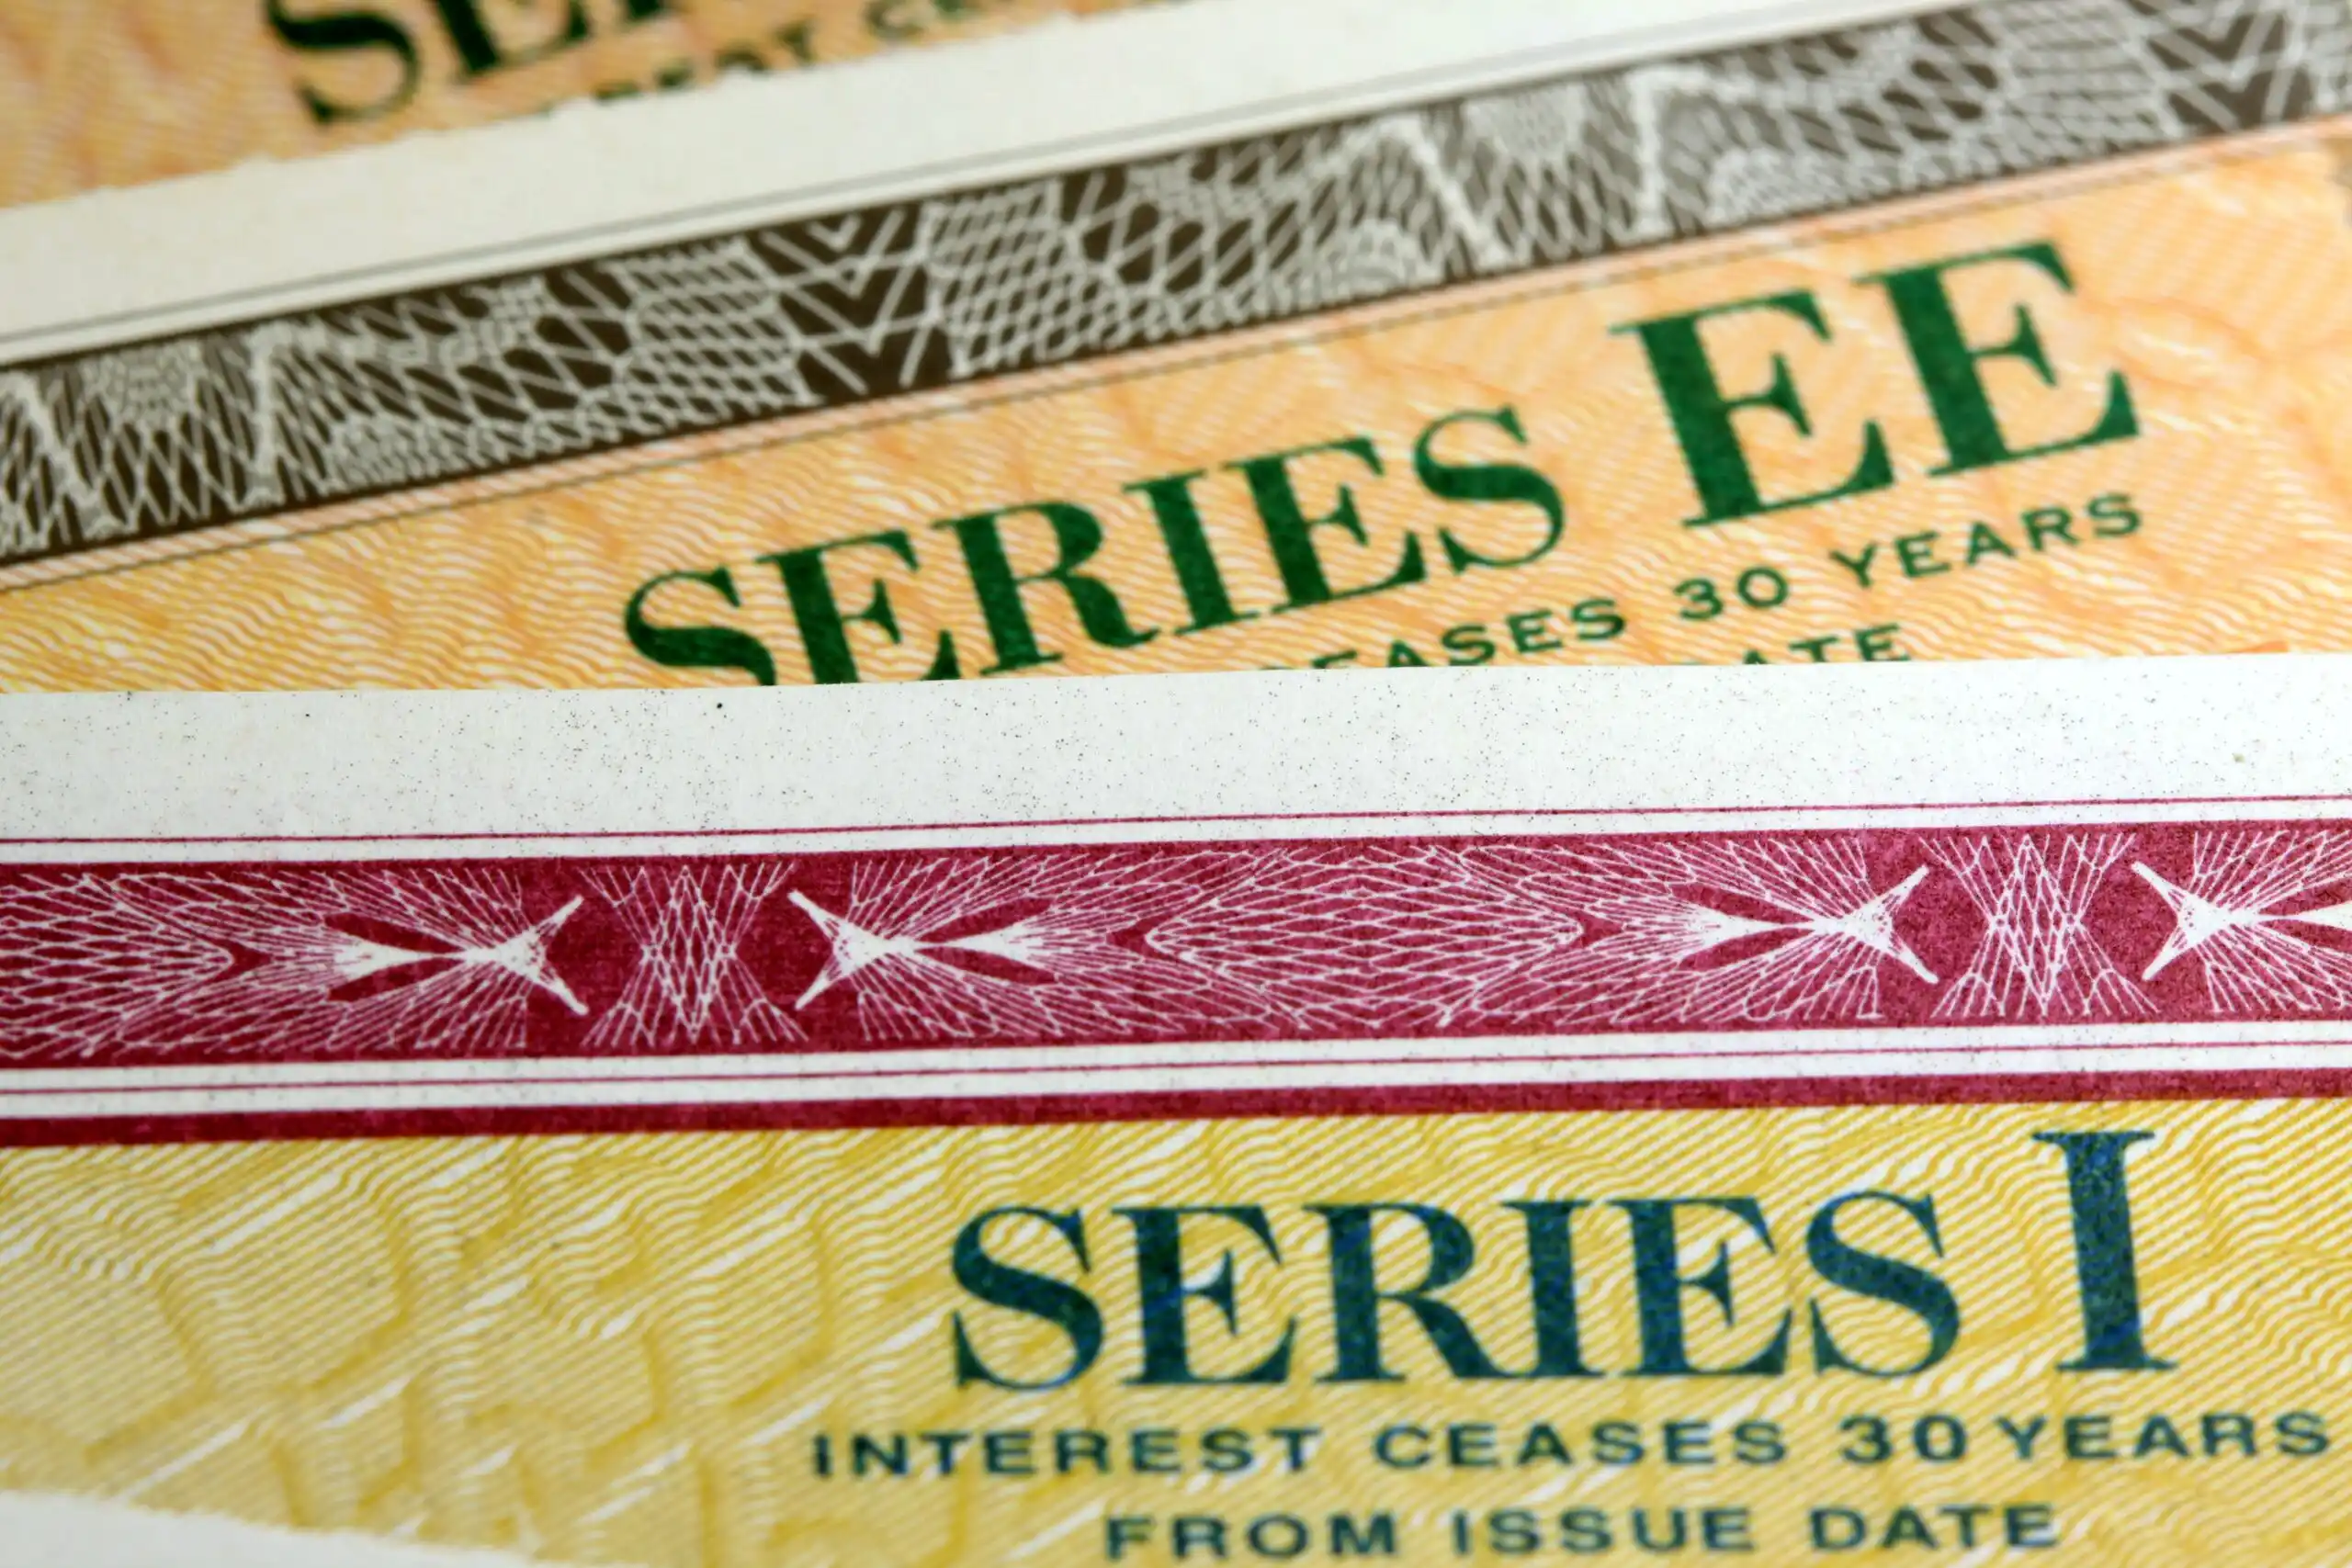 How to Cash in Savings Bonds: Everything You Need to Know